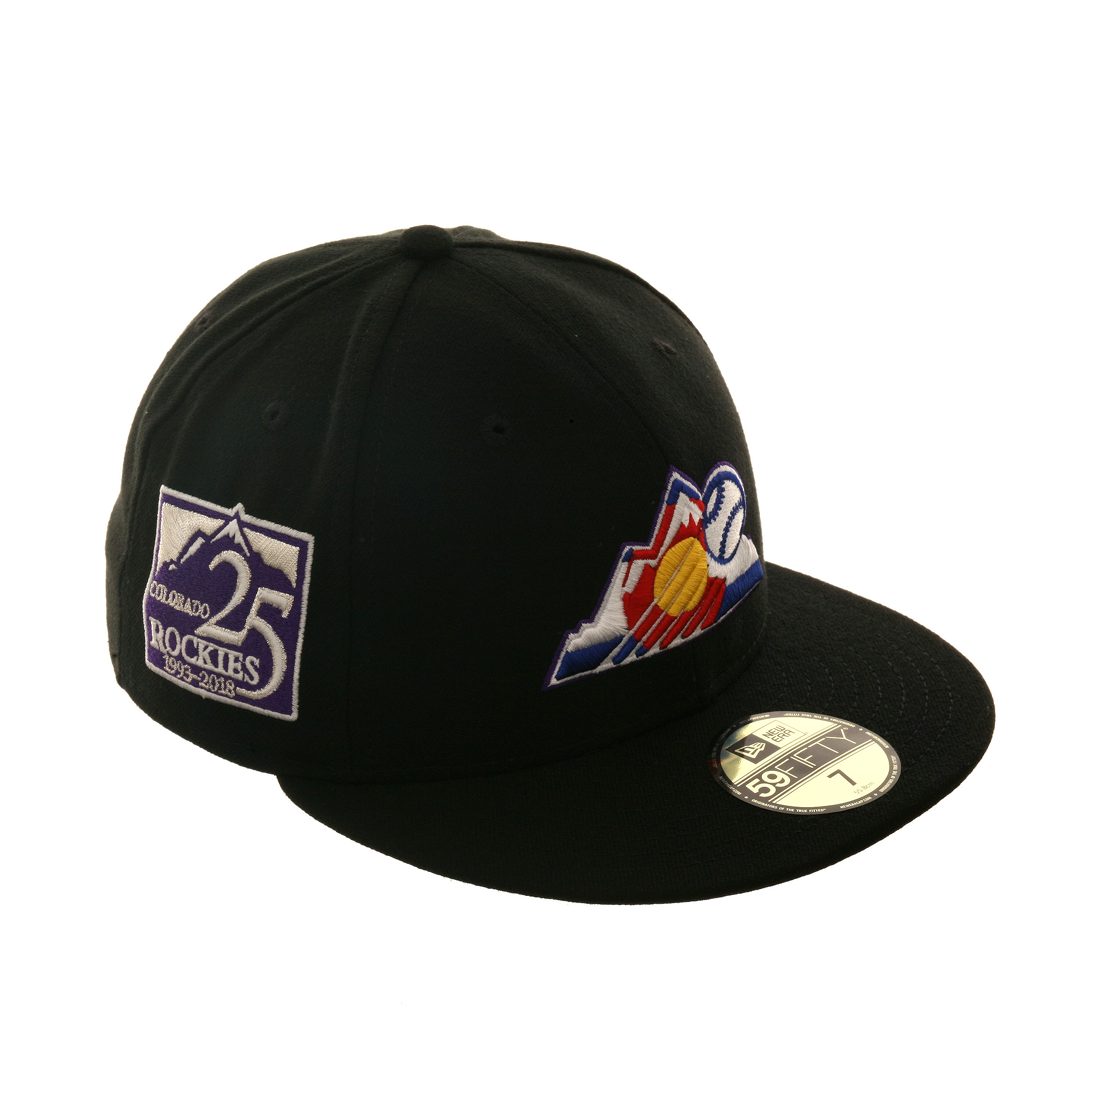 Hat Club: New D-backs and Rockies Anniversary Exclusives just